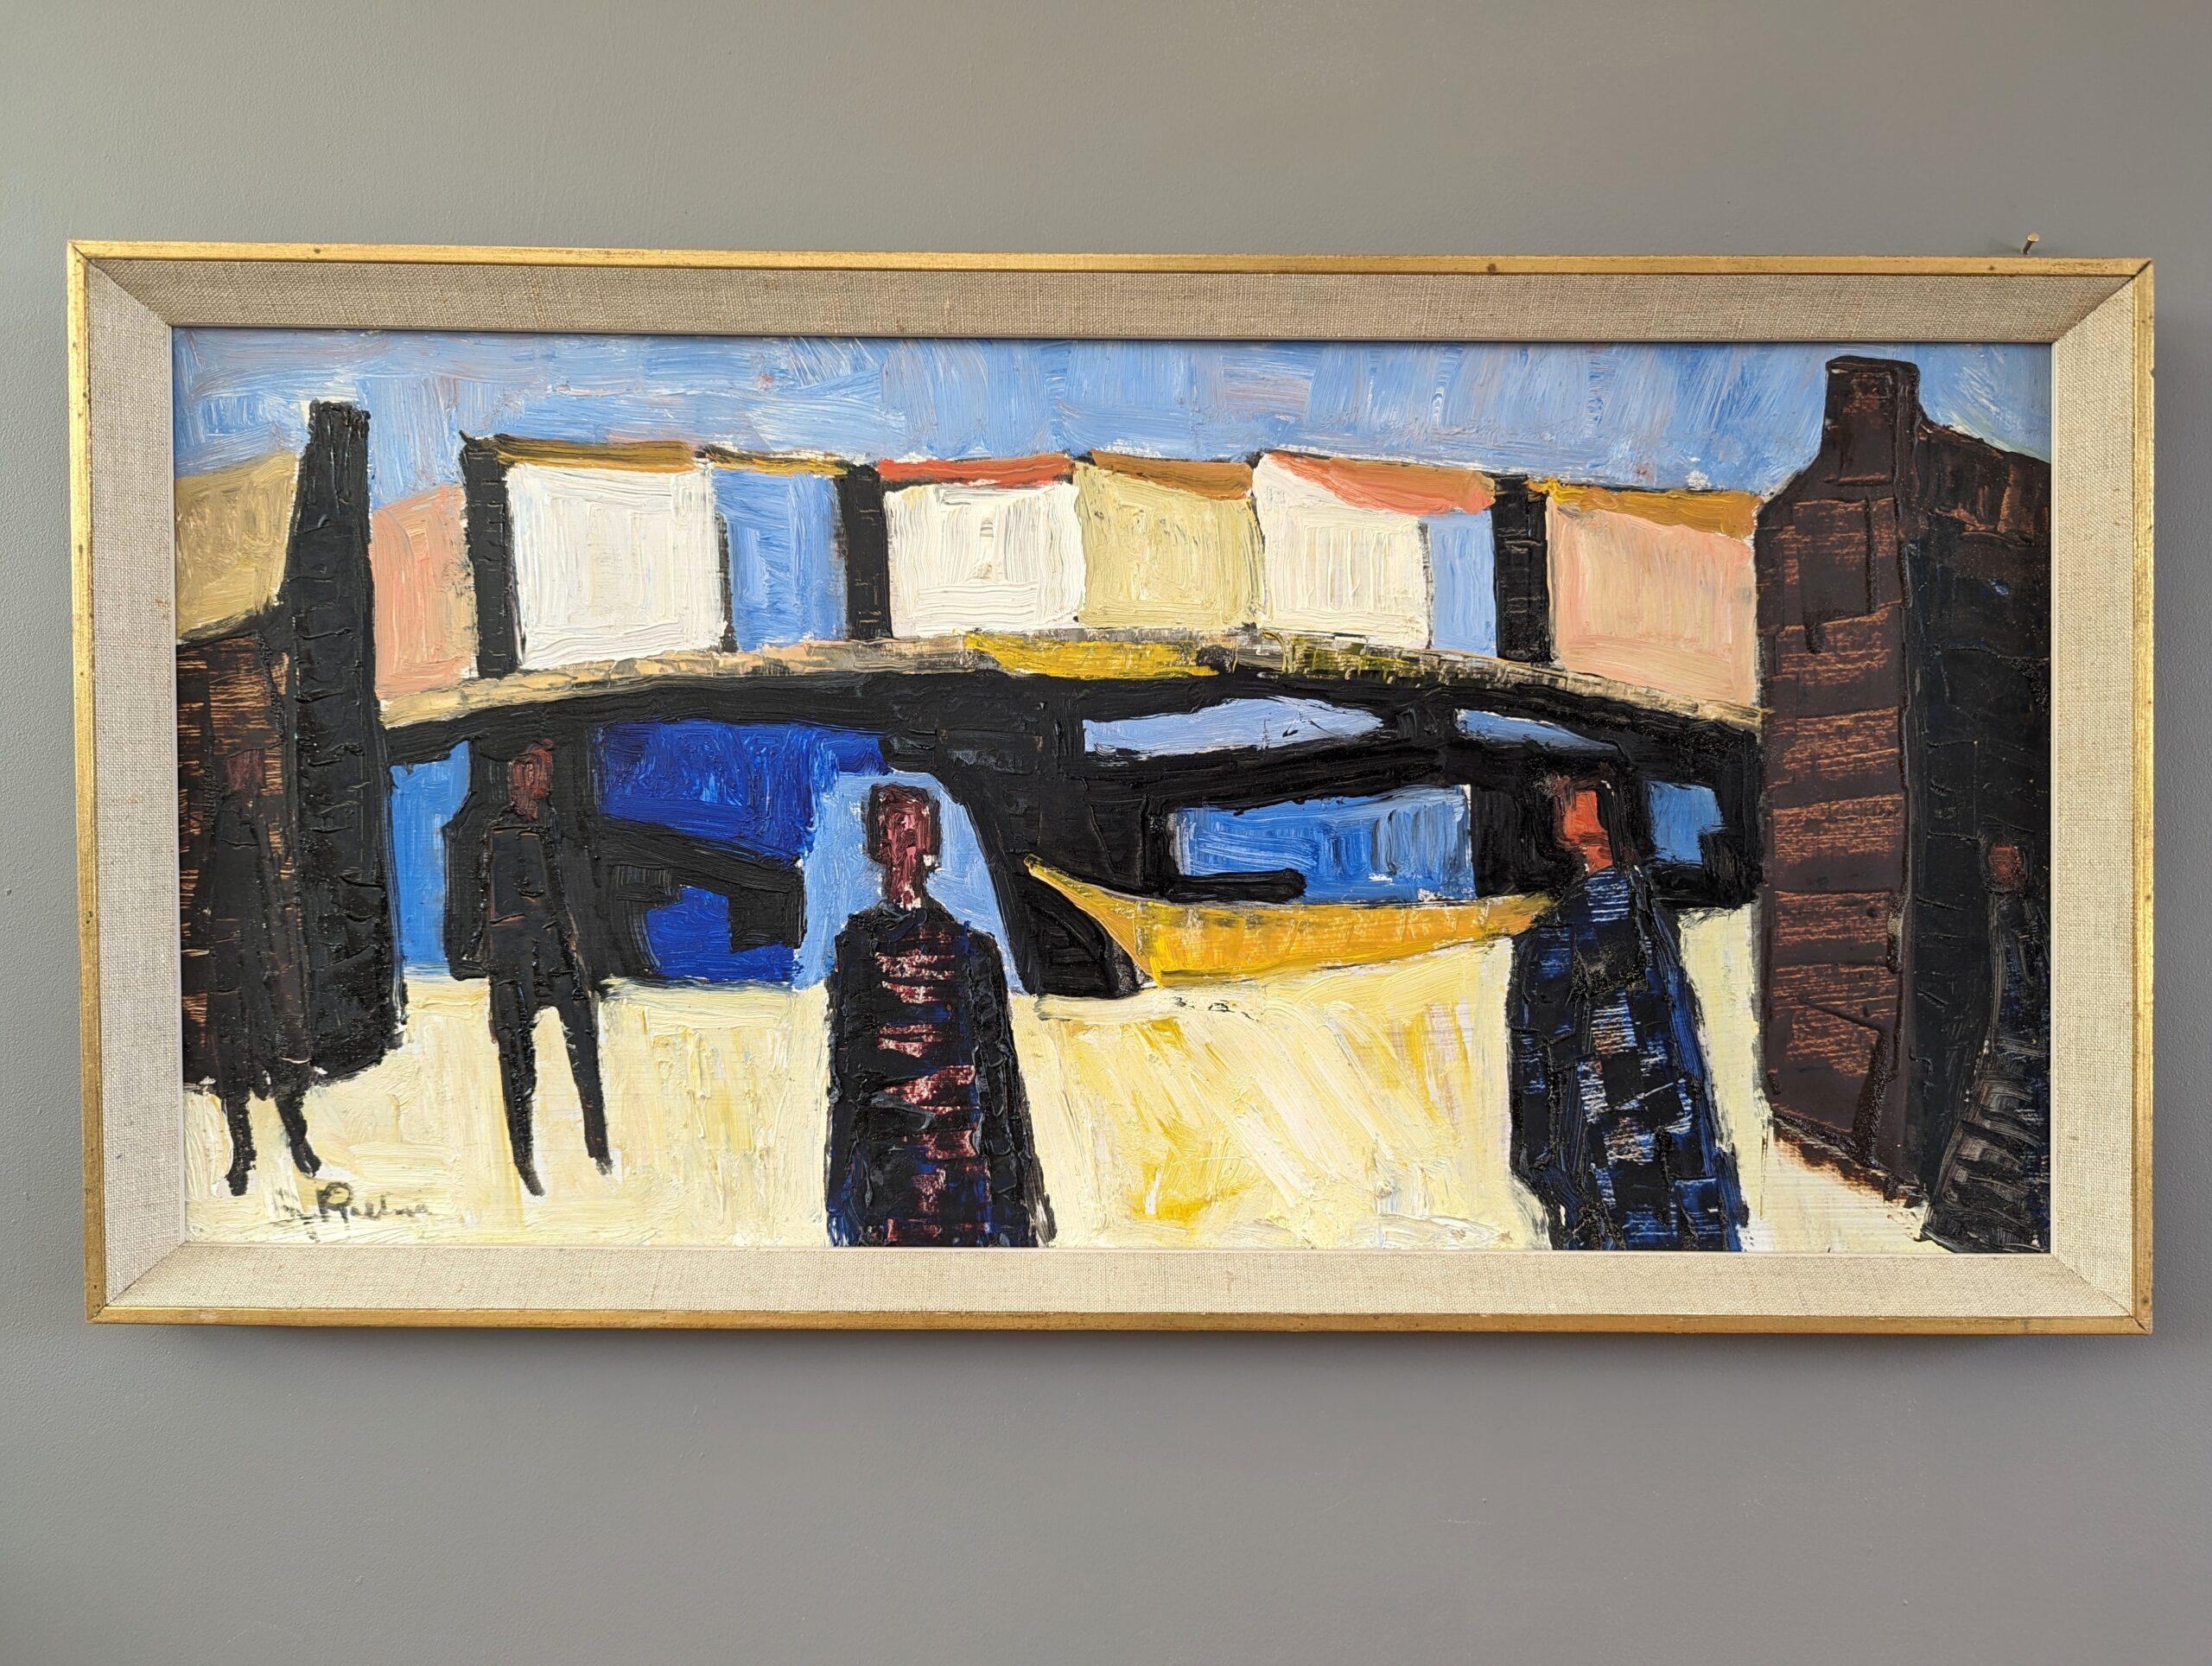 FIGURES BY THE HARBOUR 
Oil on Board 
Size: 34 x 64 cm (including frame)

Characterised by bold lines, vivid colours and distinct forms, this painting carries a modernist ethos. We see three figures standing by a harbour, but the artist has chosen